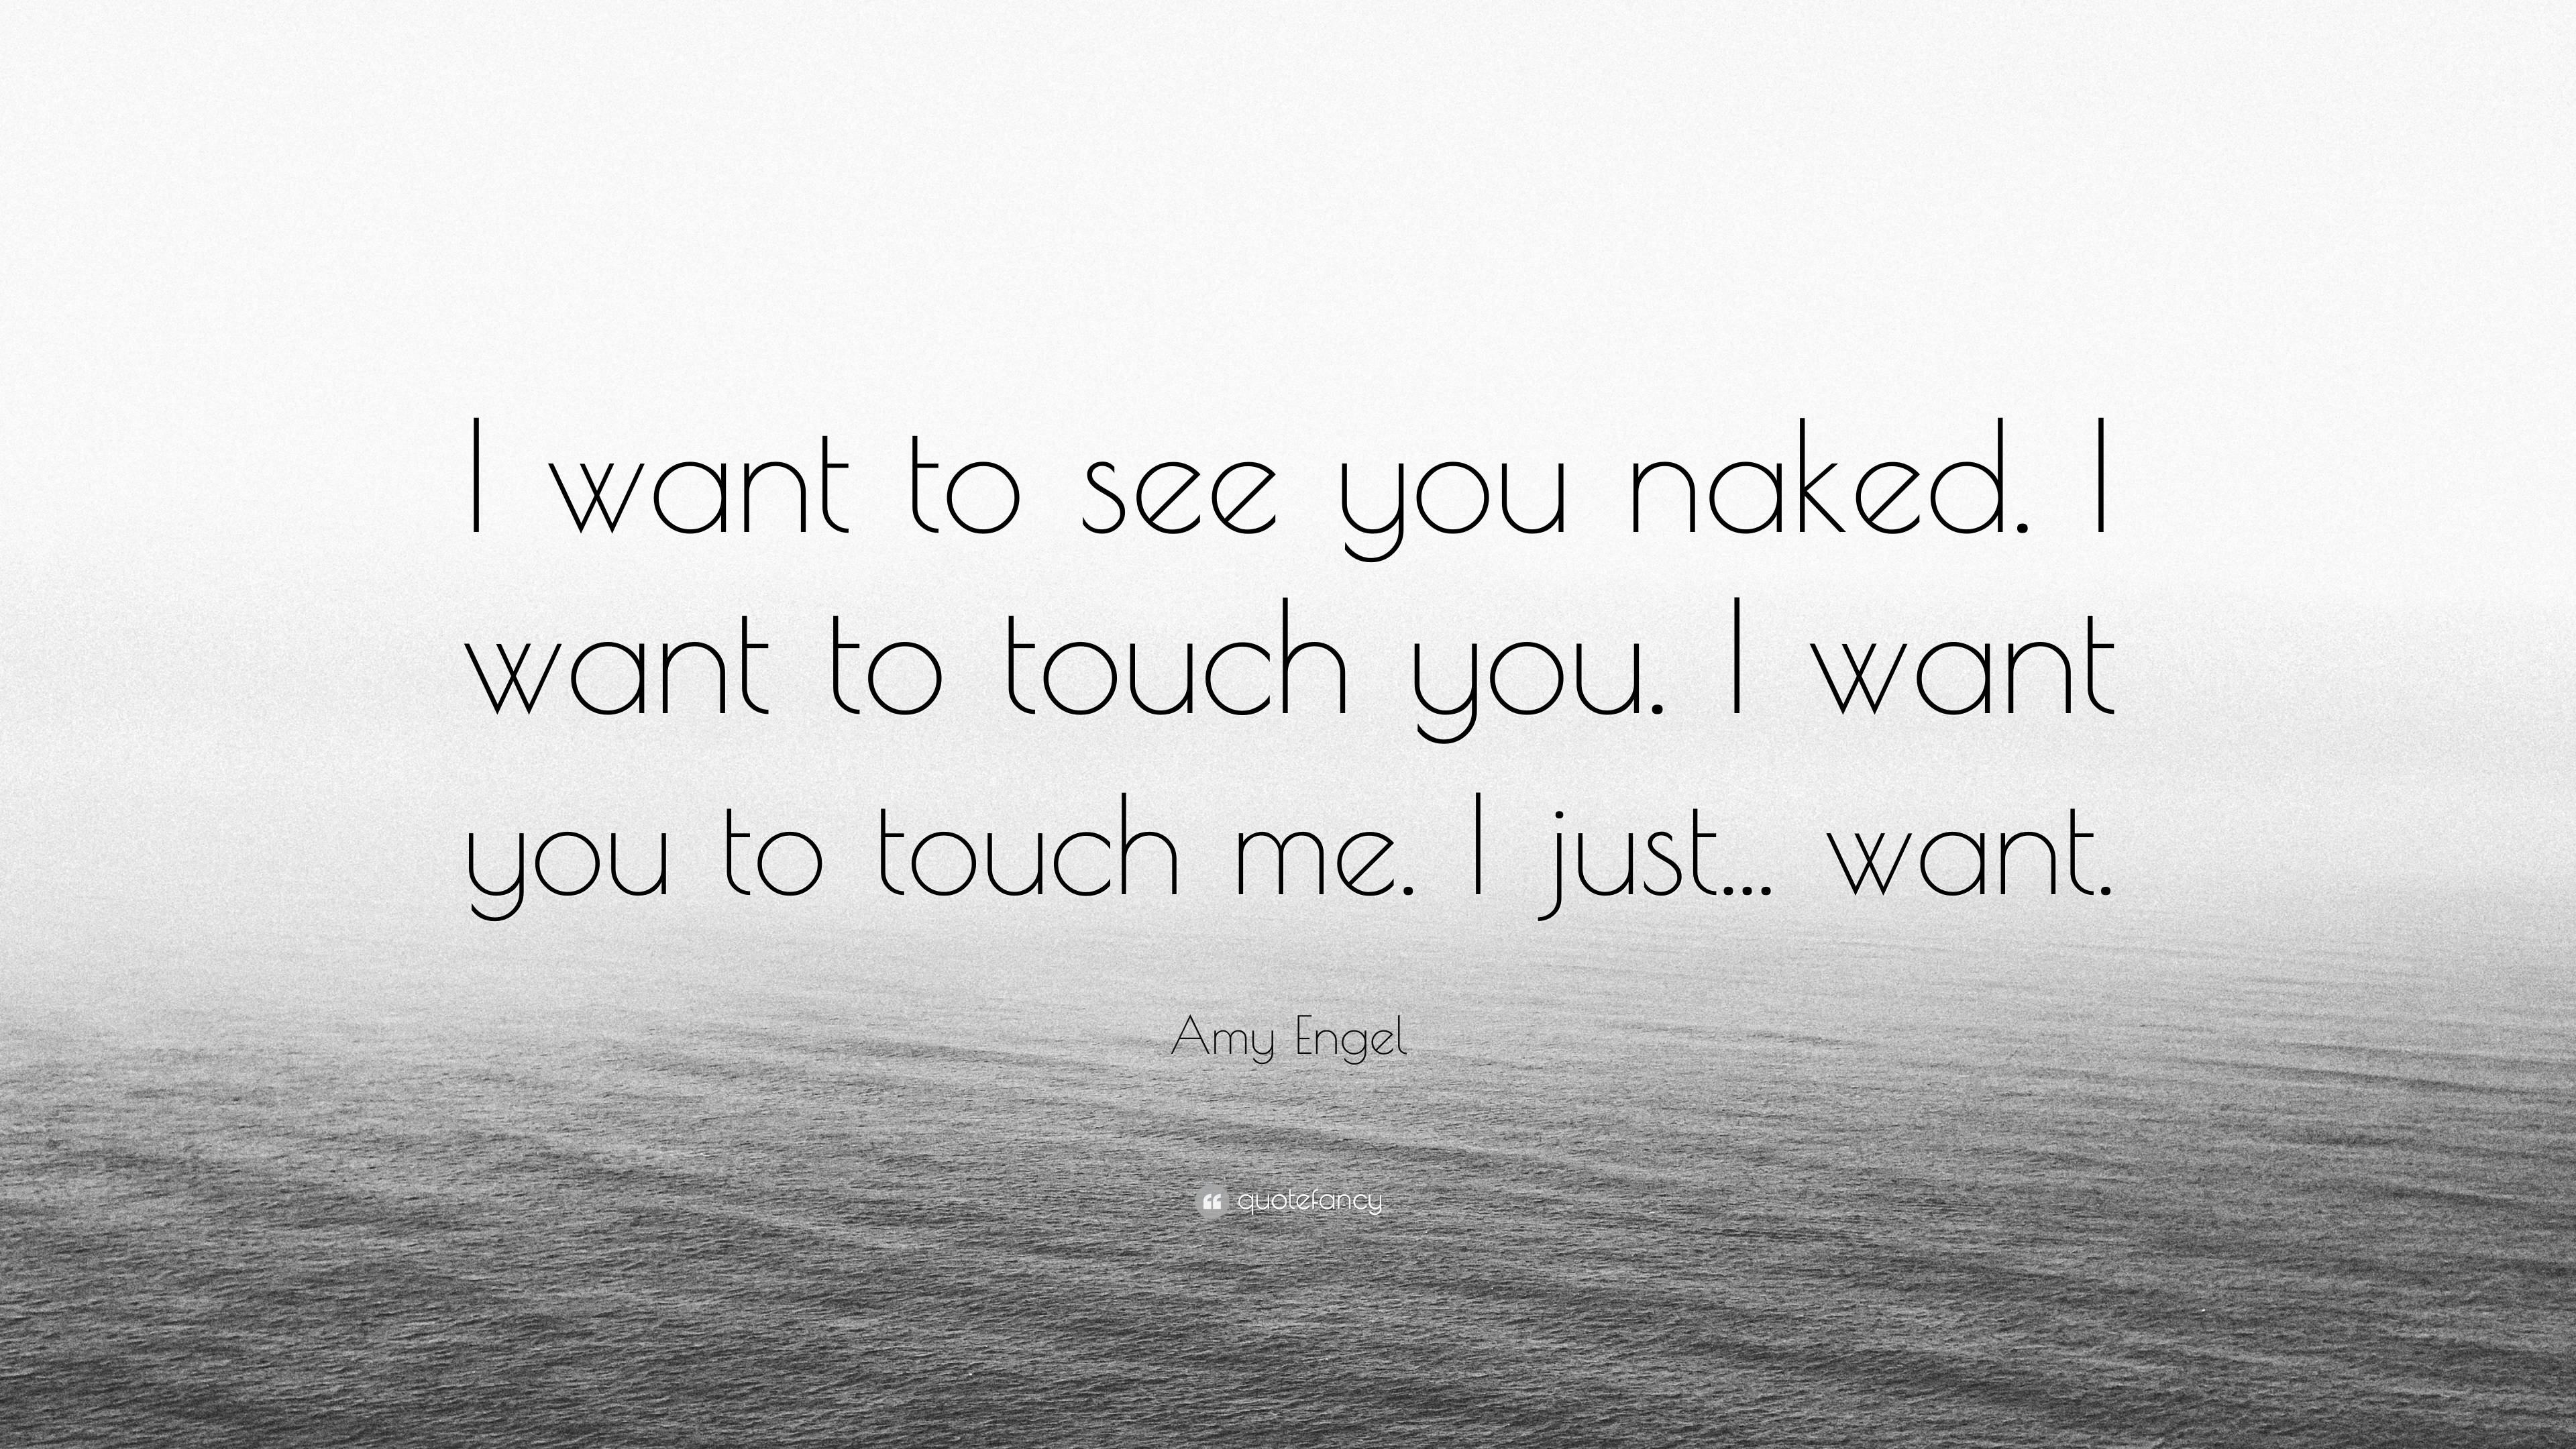 i just want you to want me quotes